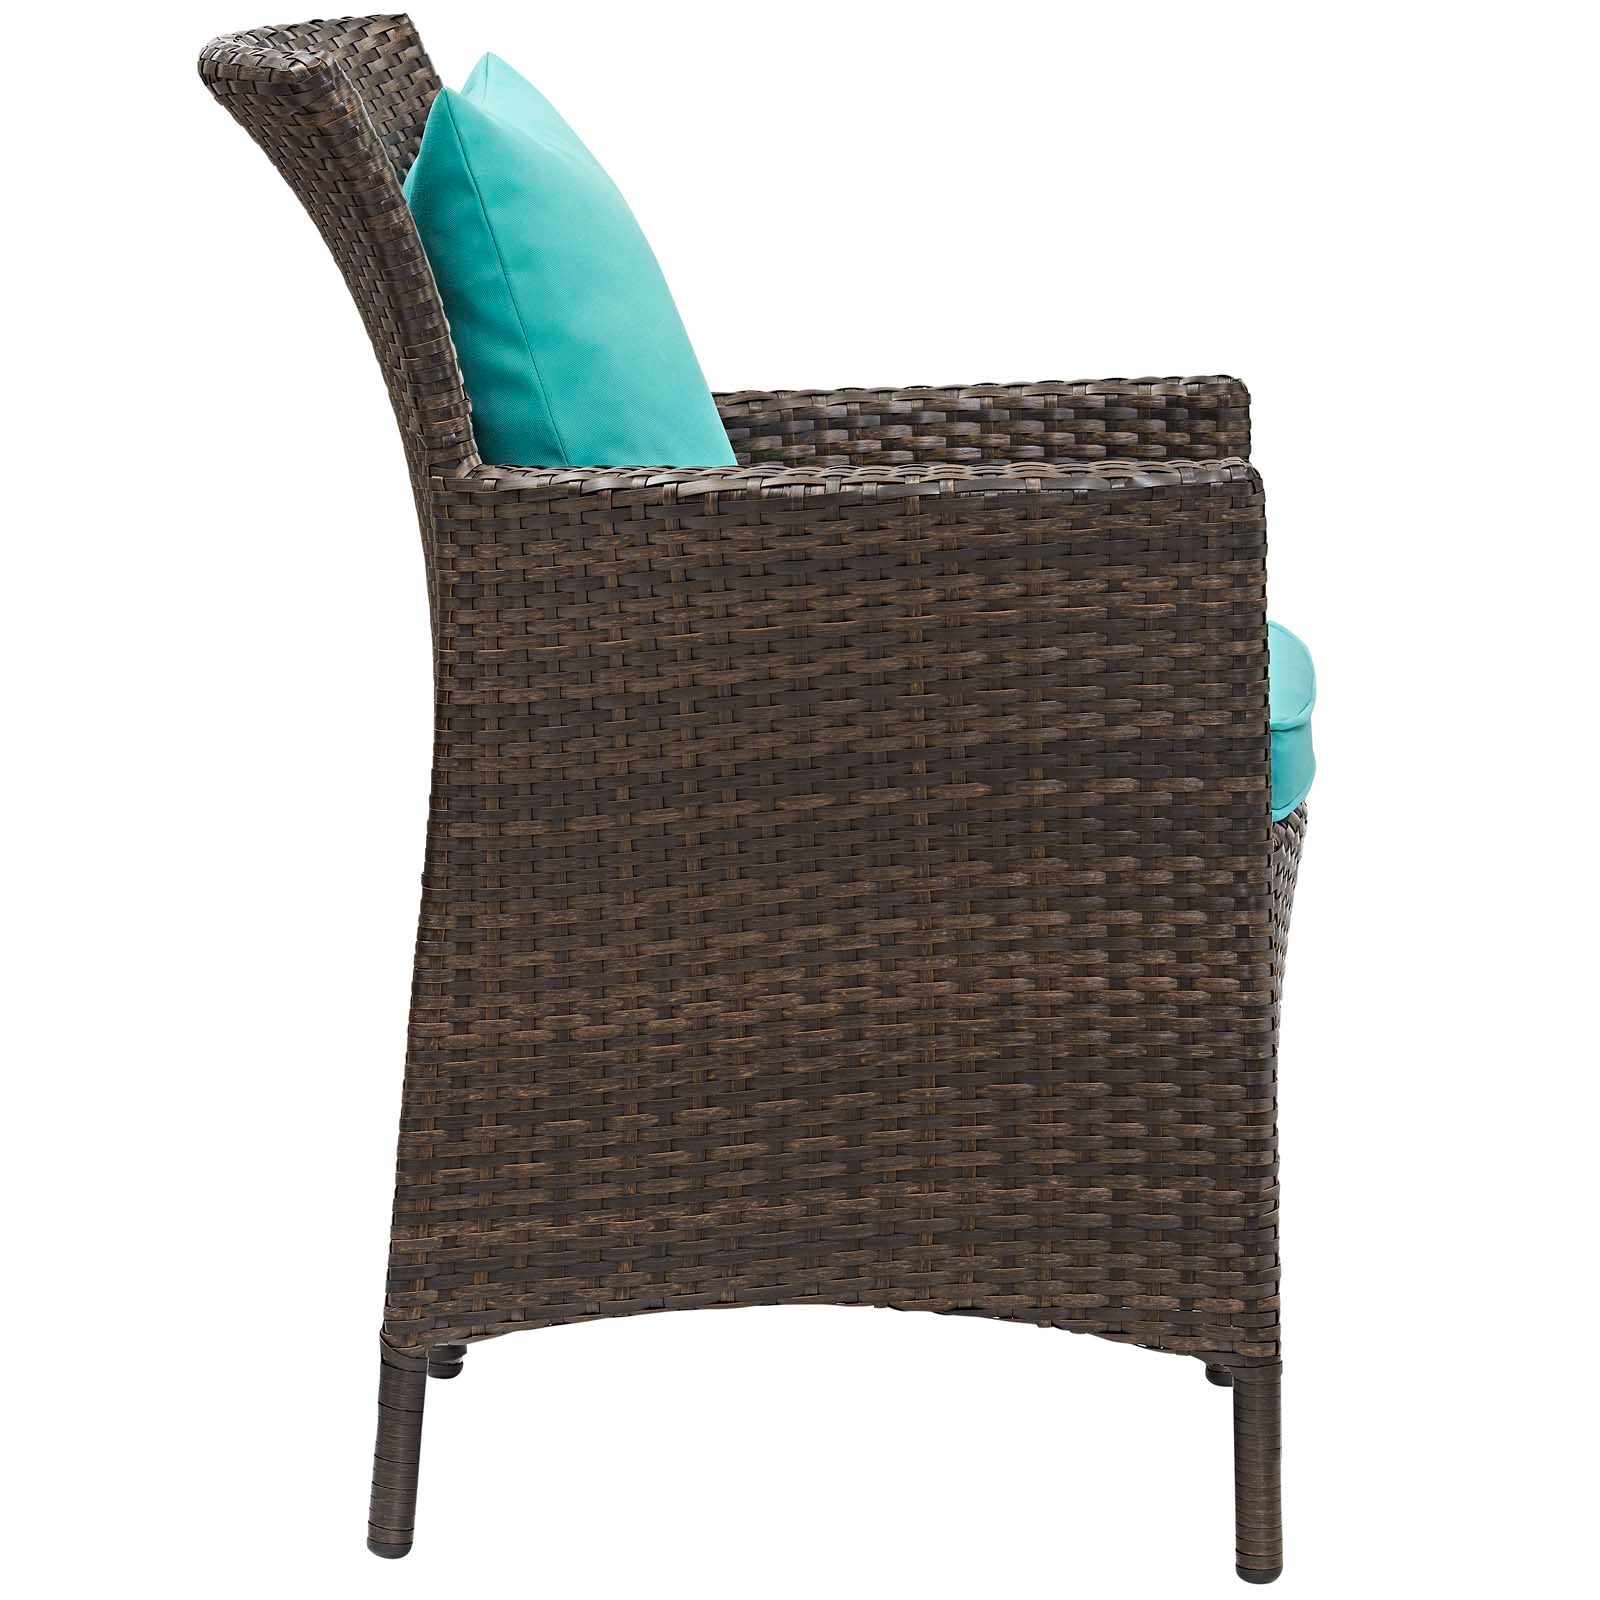 Modway Outdoor Dining Chairs - Conduit Outdoor Patio Wicker Rattan Dining Armchair Brown Turquoise